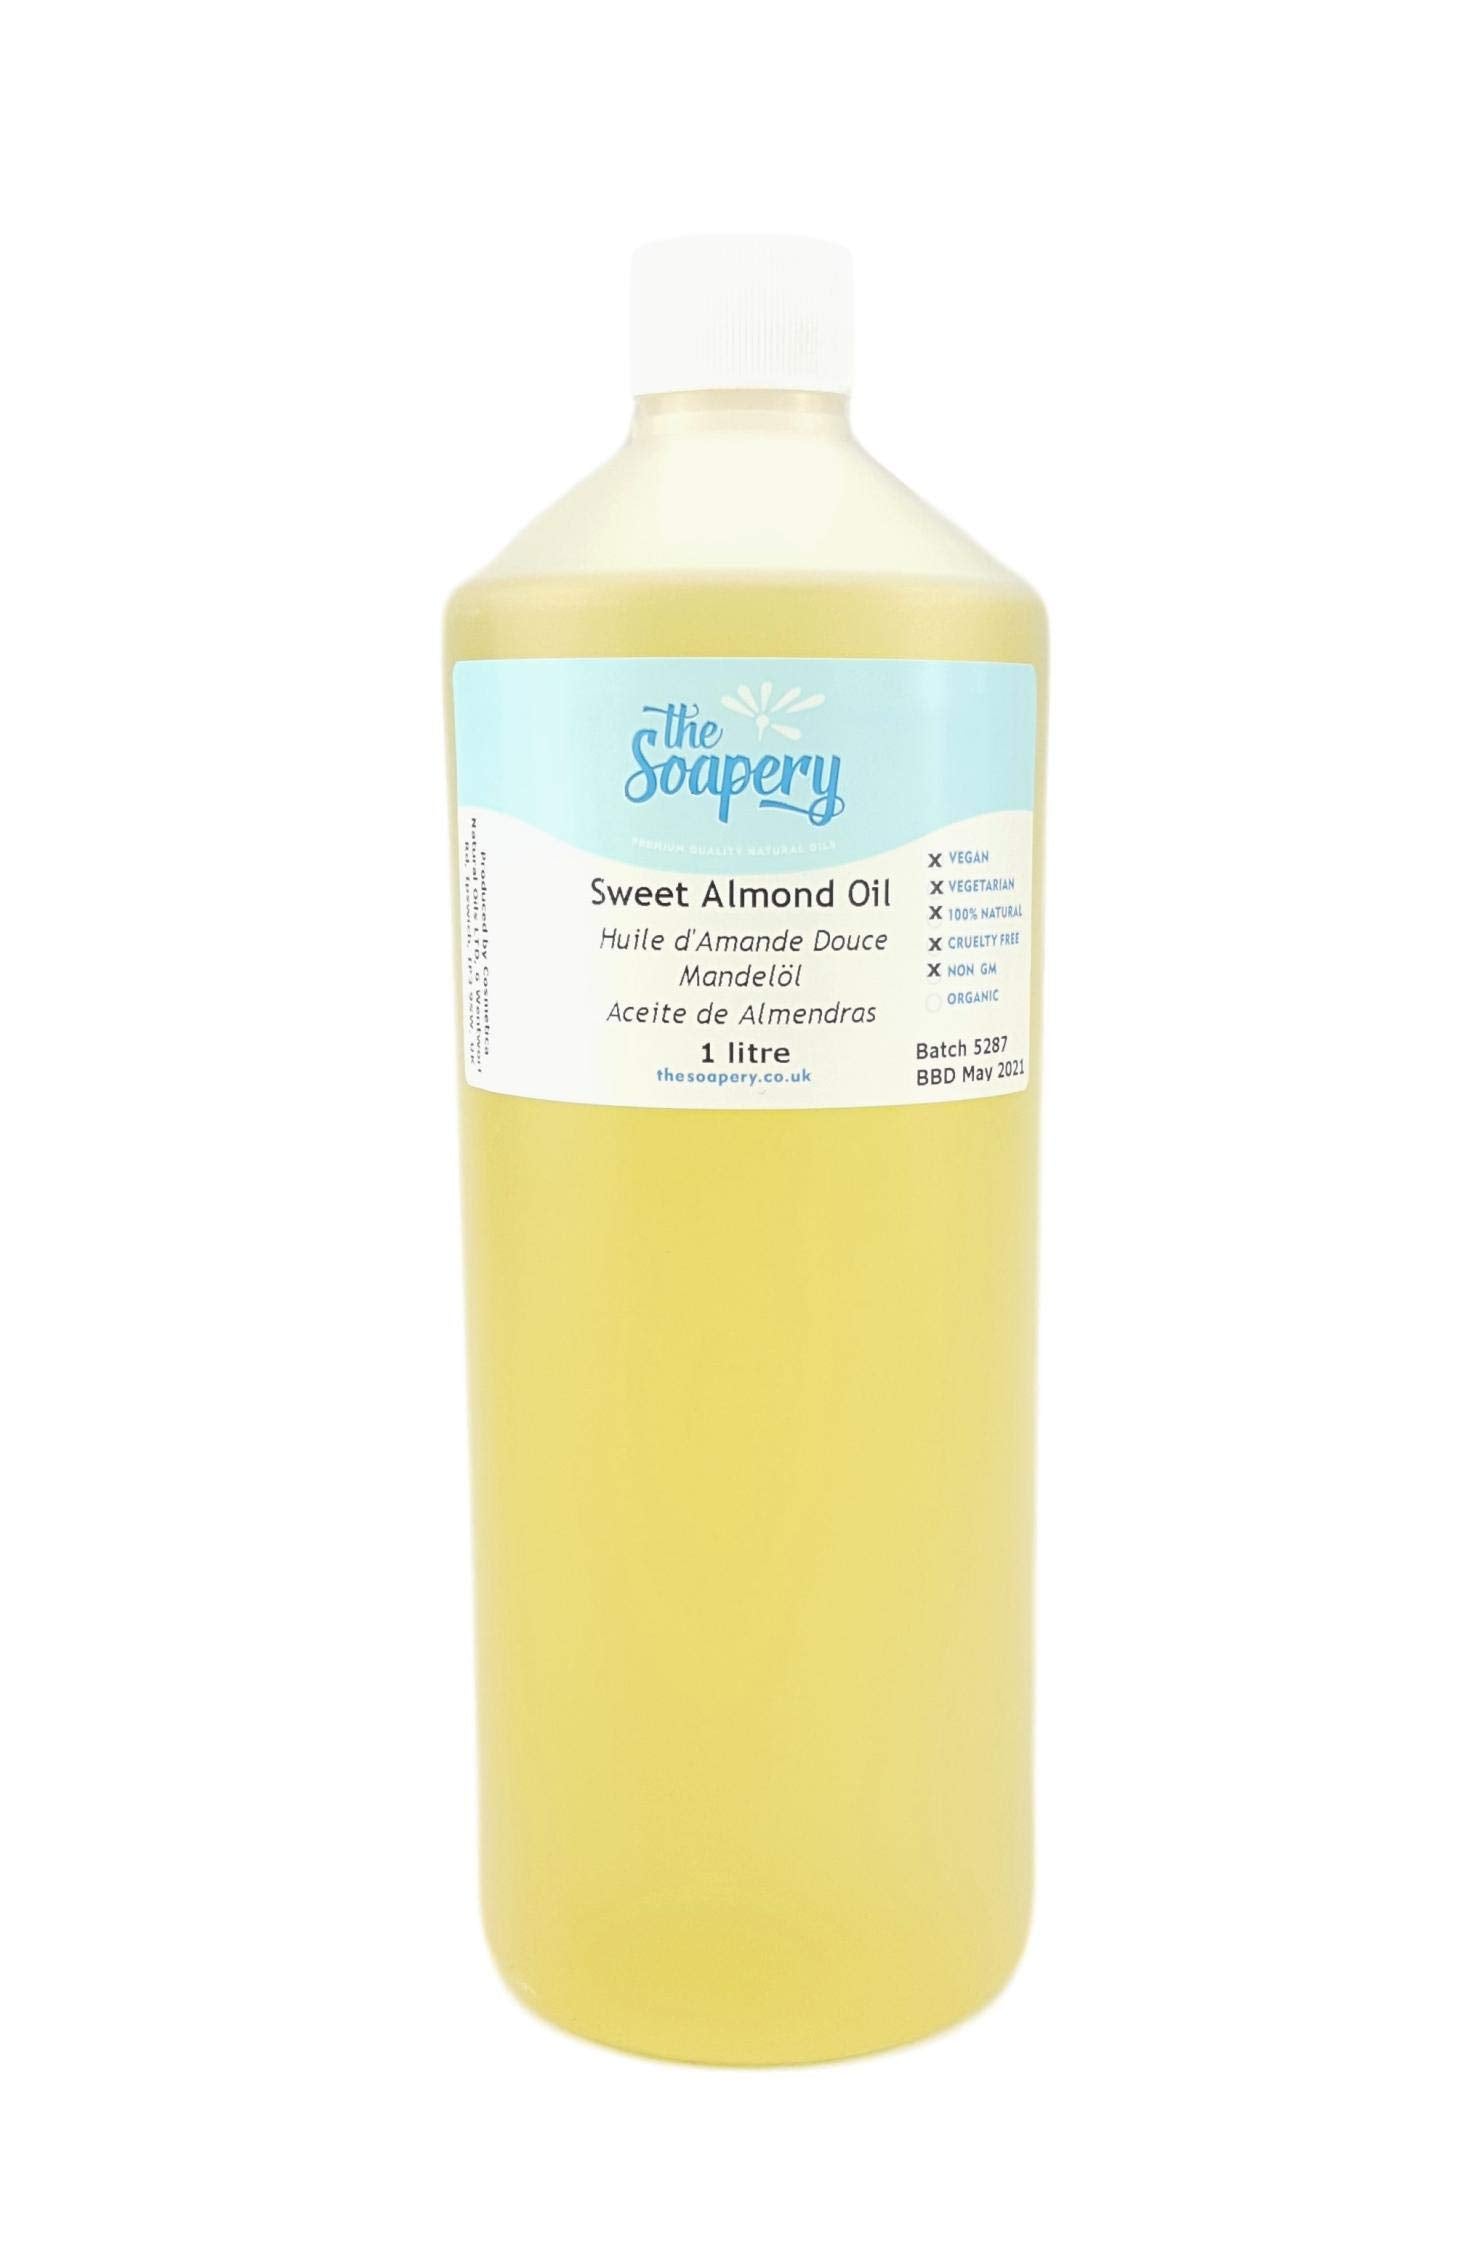 Sweet Almond Oil - 1 Litre Cosmetic Grade for Massage, Aromatherapy, Soaps, Lotions.